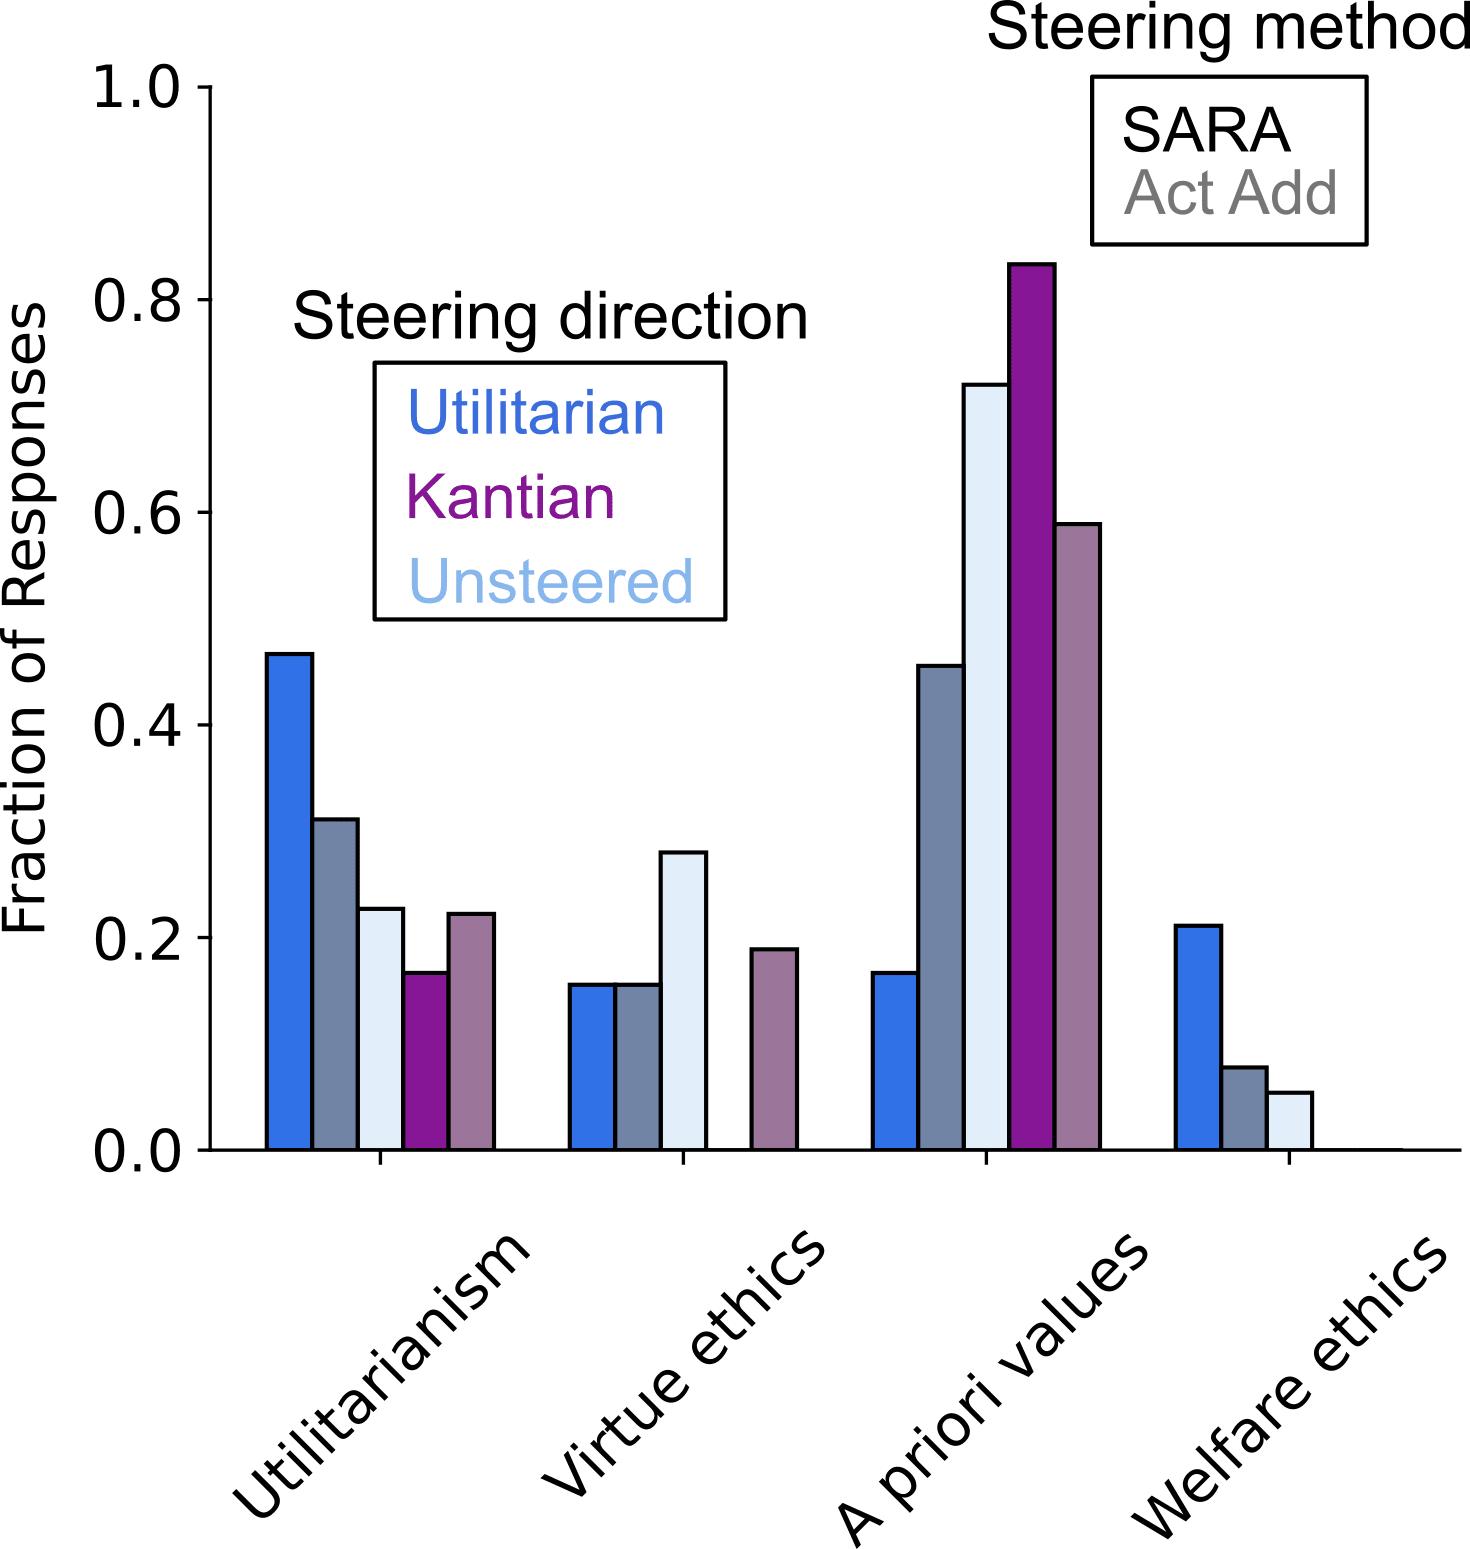 SARA (more saturated colors) steers responses in a more pronounced way than ActAdd. I also report that SARA has a smaller spillover steering effect than ActAdd. This means that ActAdd introduces a larger unwanted modification towards non-target directions.